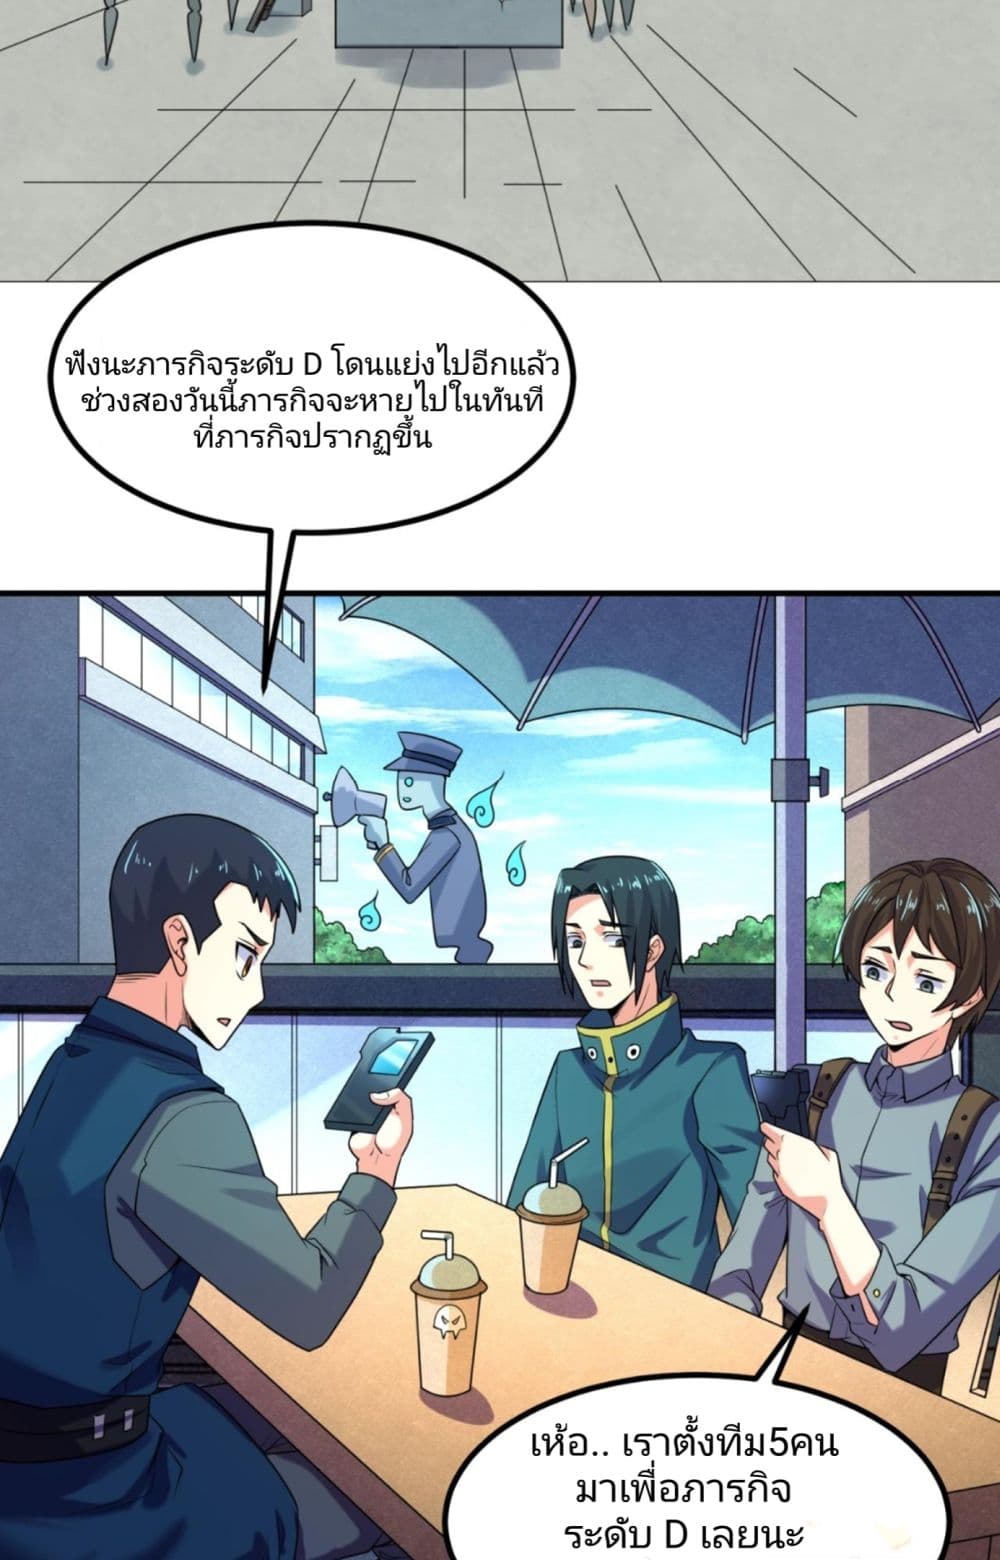 The Age of Ghost Spirits à¸à¸­à¸à¸à¸µà¹ 7 (47)